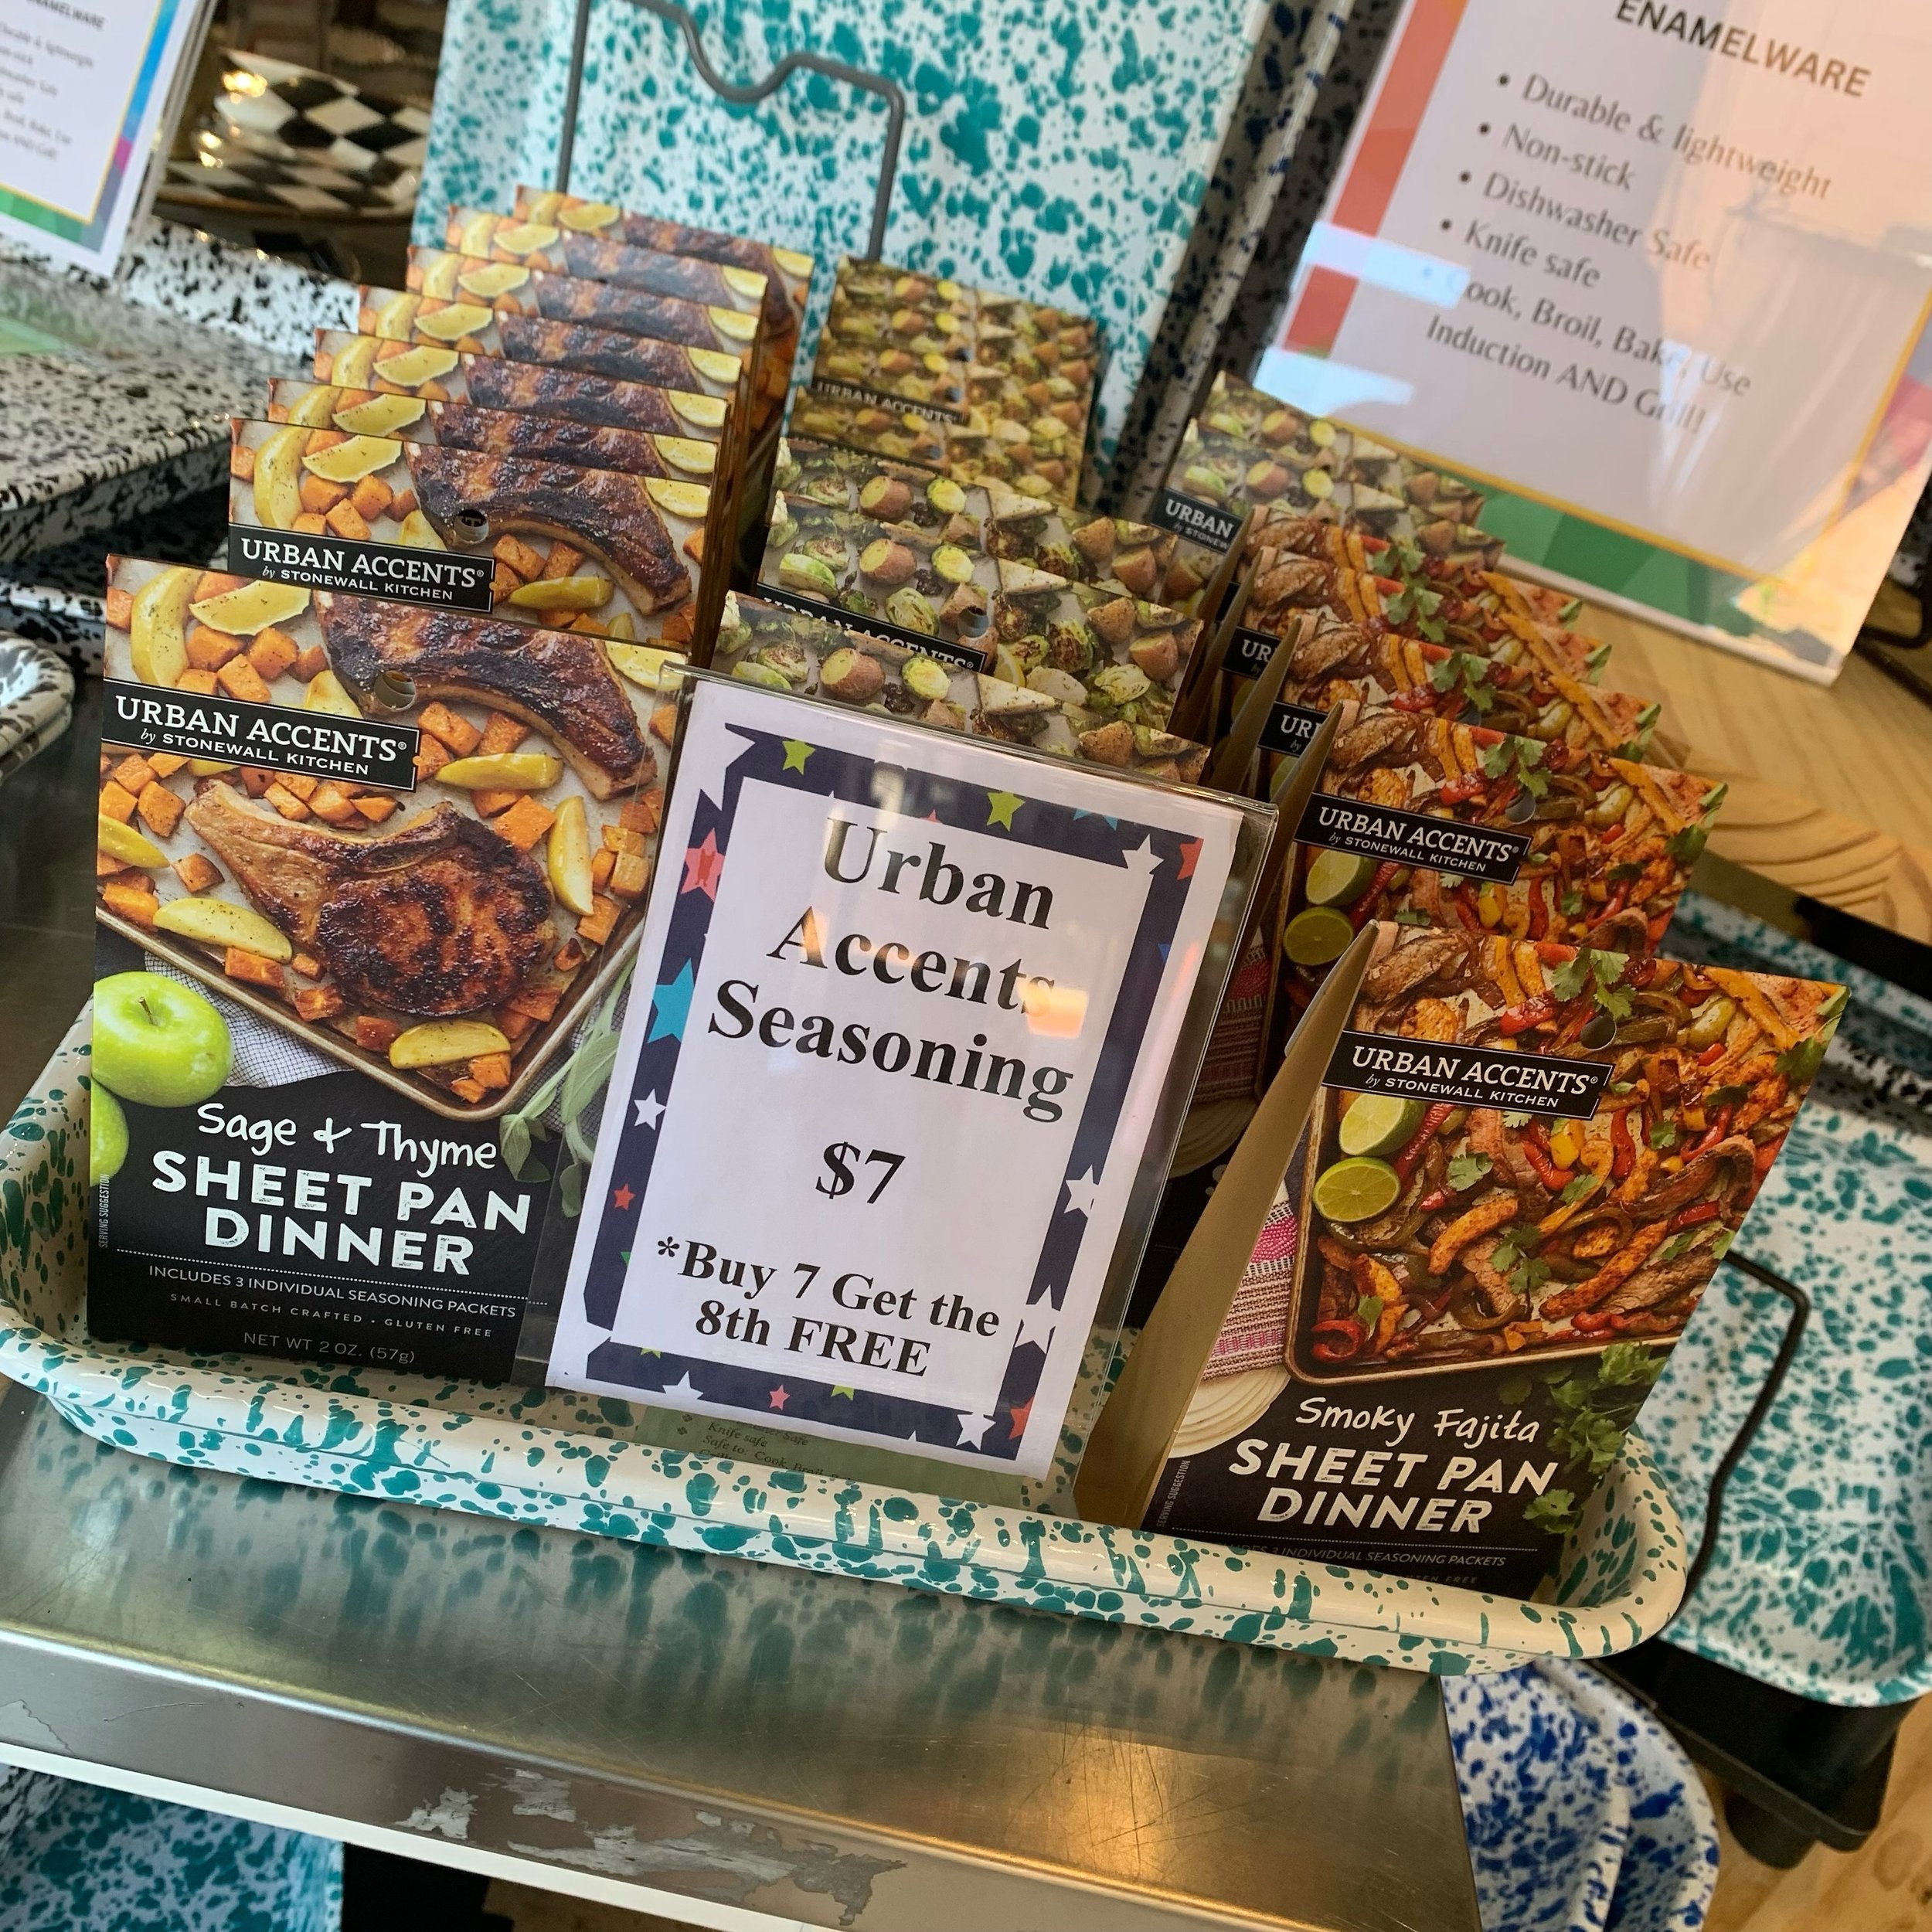 What&rsquo;s for dinner?! Urban Accents seasonings makes meal time SO easy and SO delicious. Great for meal prepping! 

PLUS: When you buy 7 you get the 8th FREE!